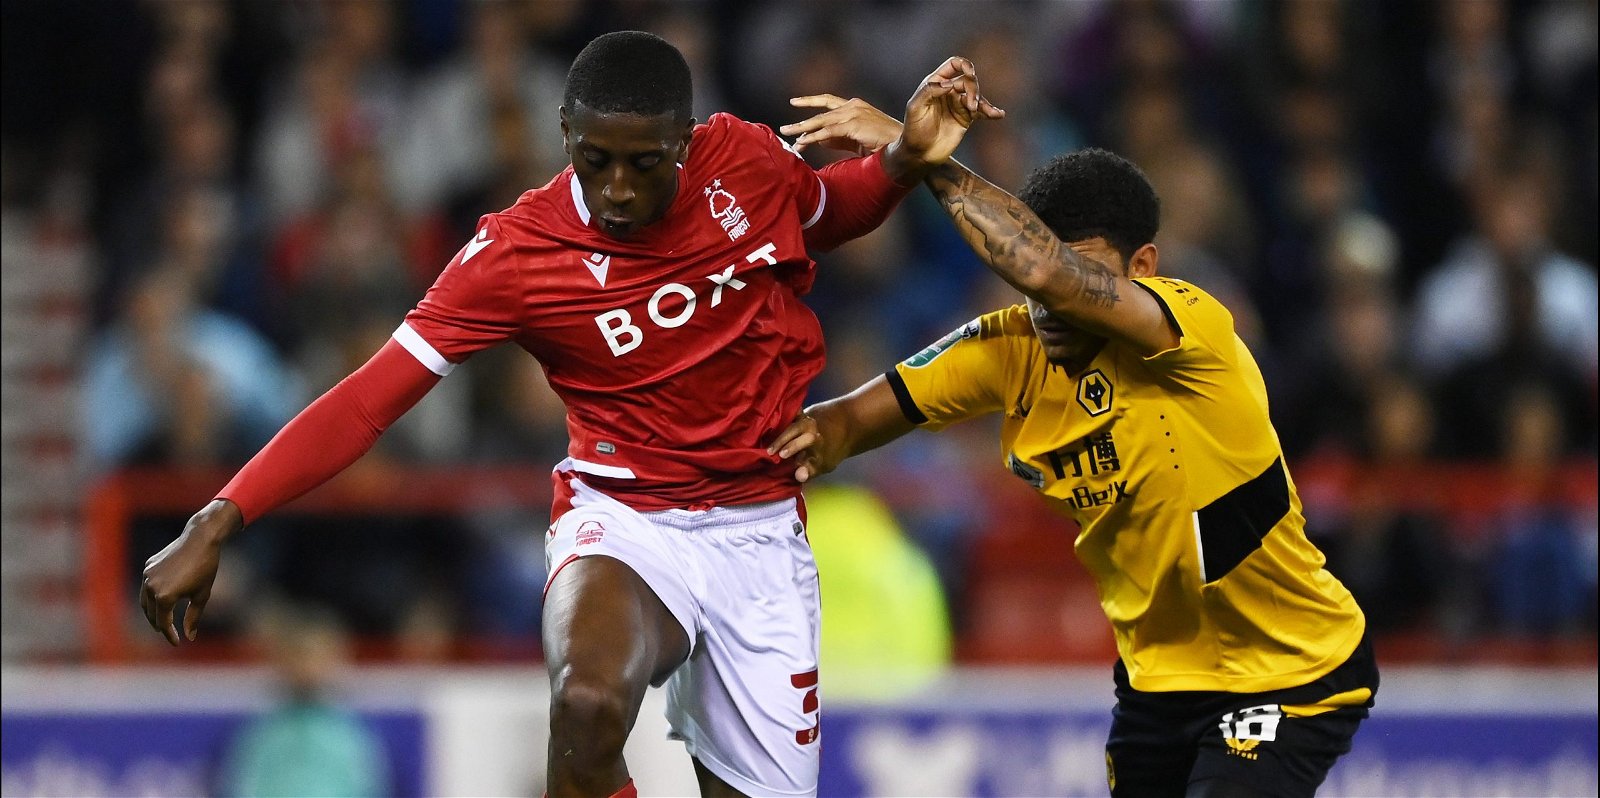 , Nottingham Forest midfielder Tyrese Fornah set for Shrewsbury Town loan switch